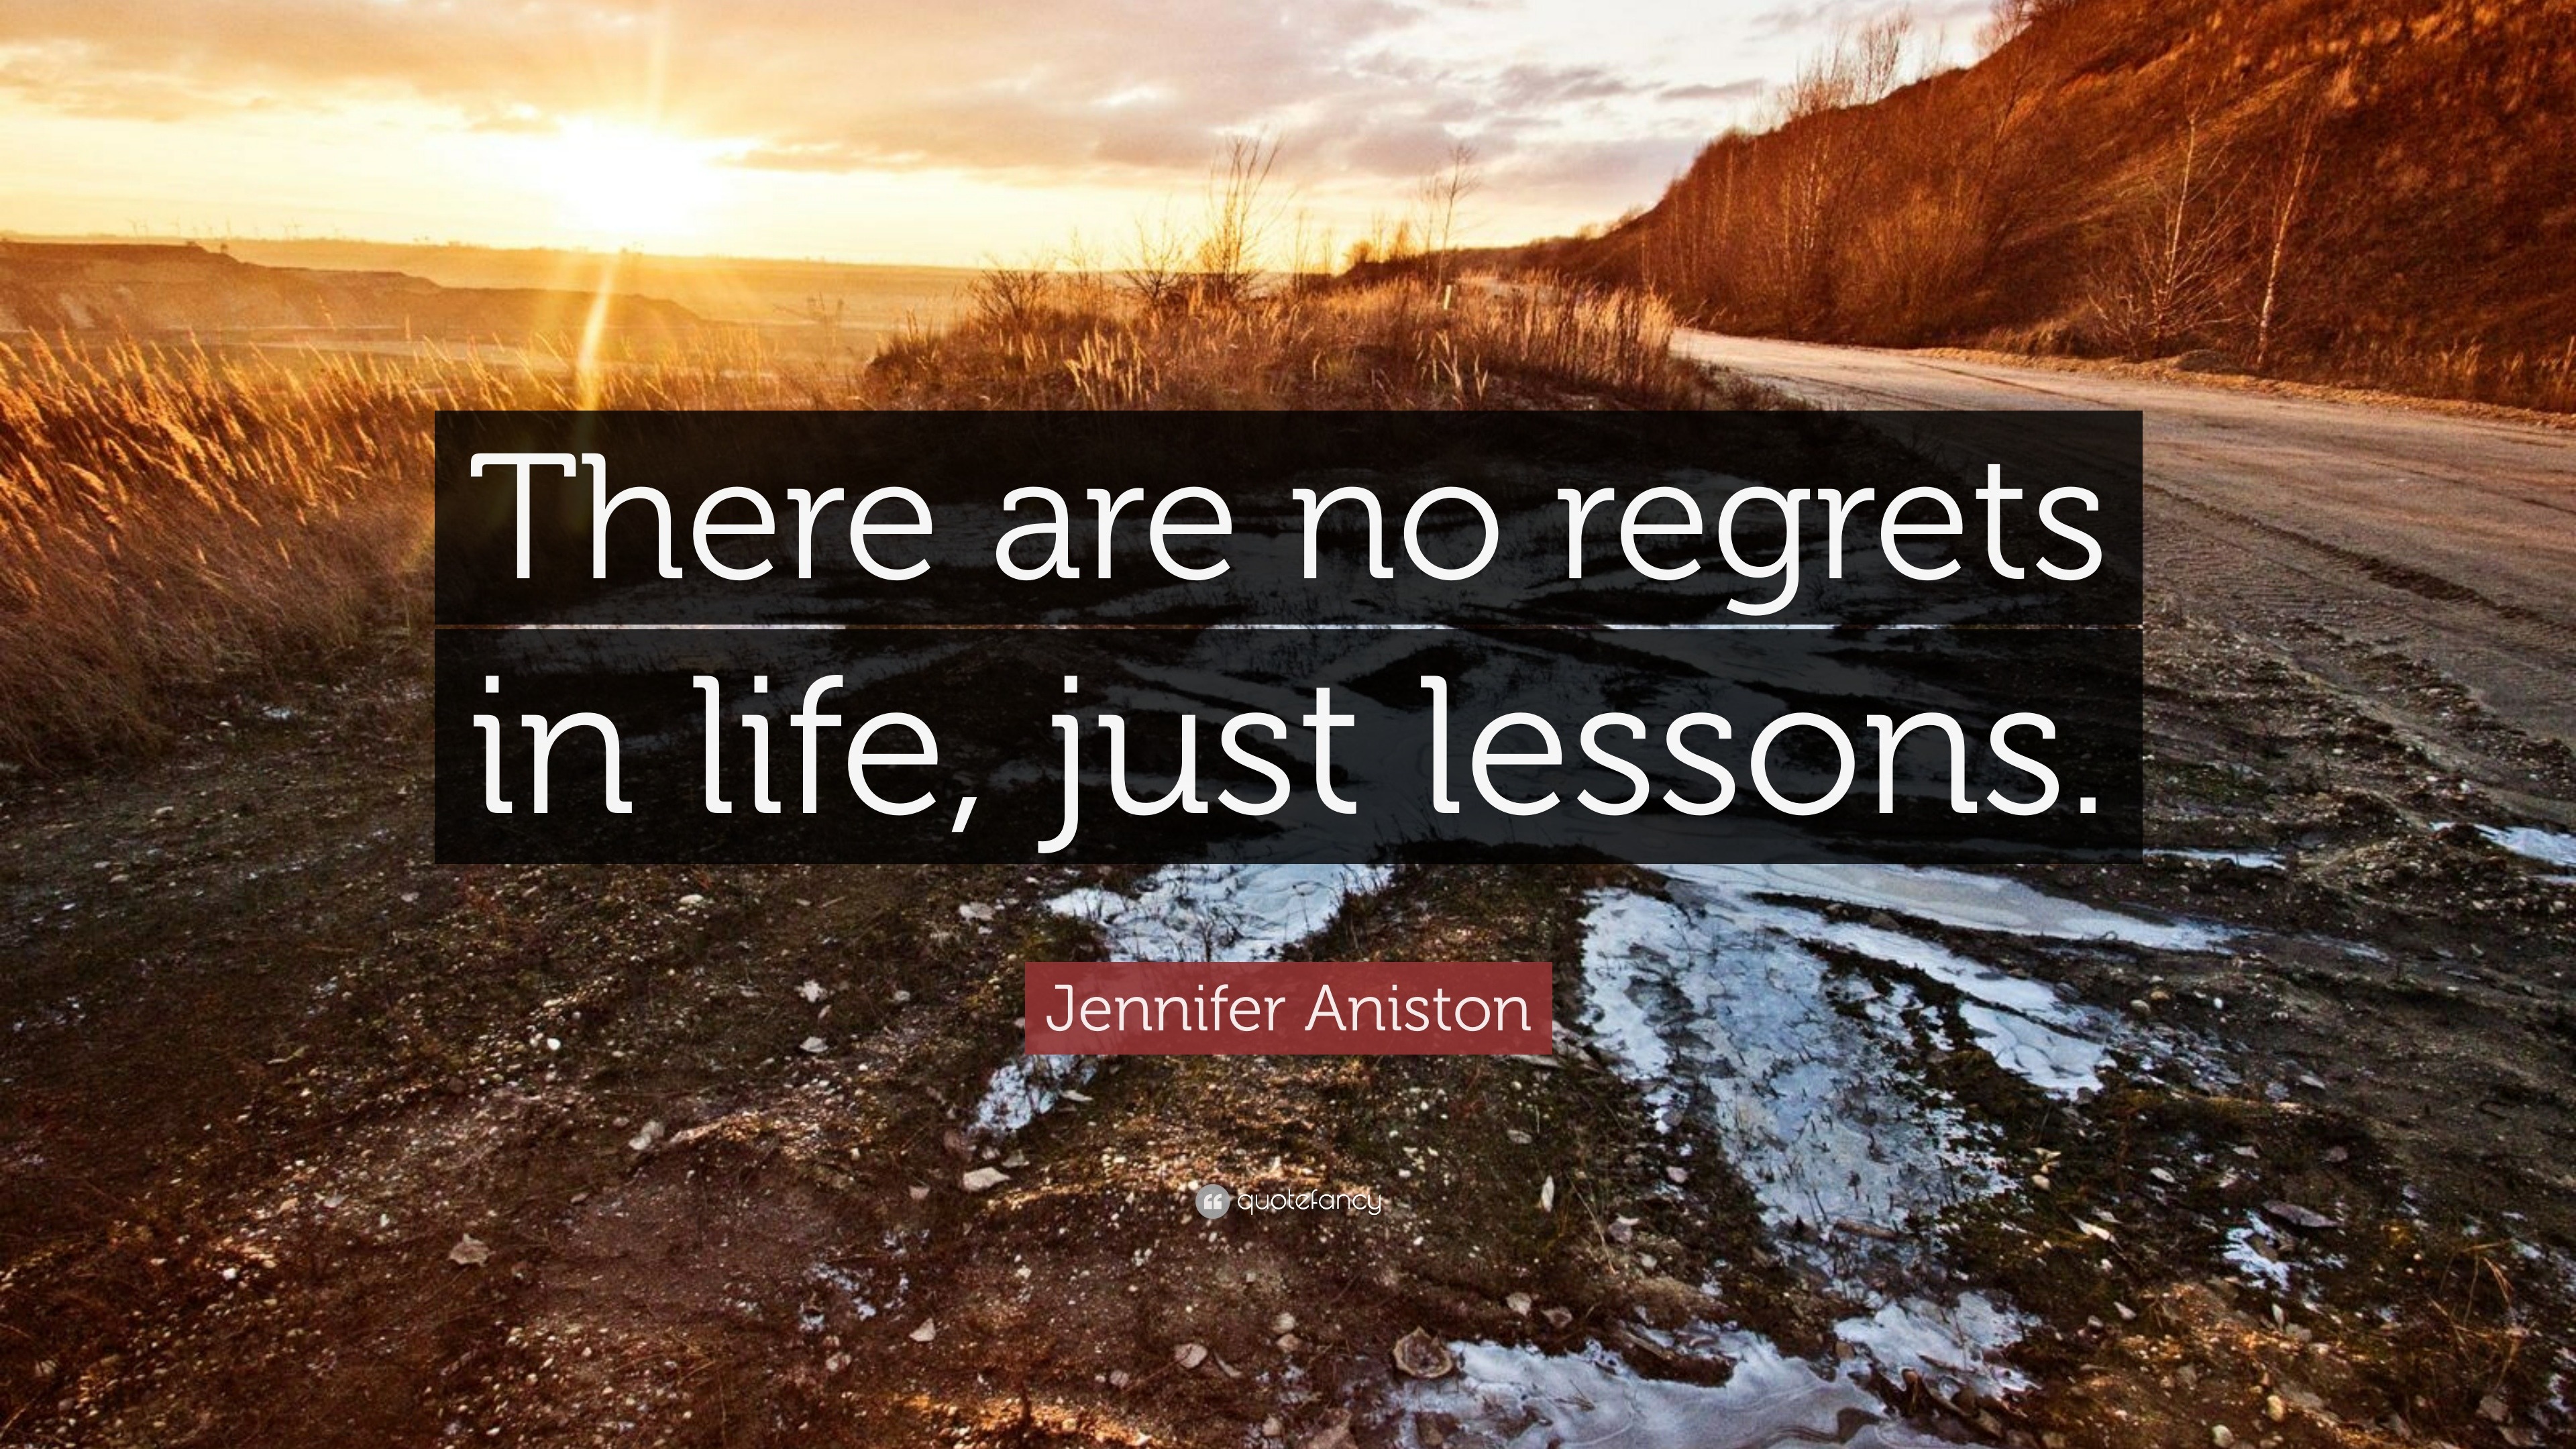 Jennifer Aniston Quote: “There are no regrets in life, just lessons.”